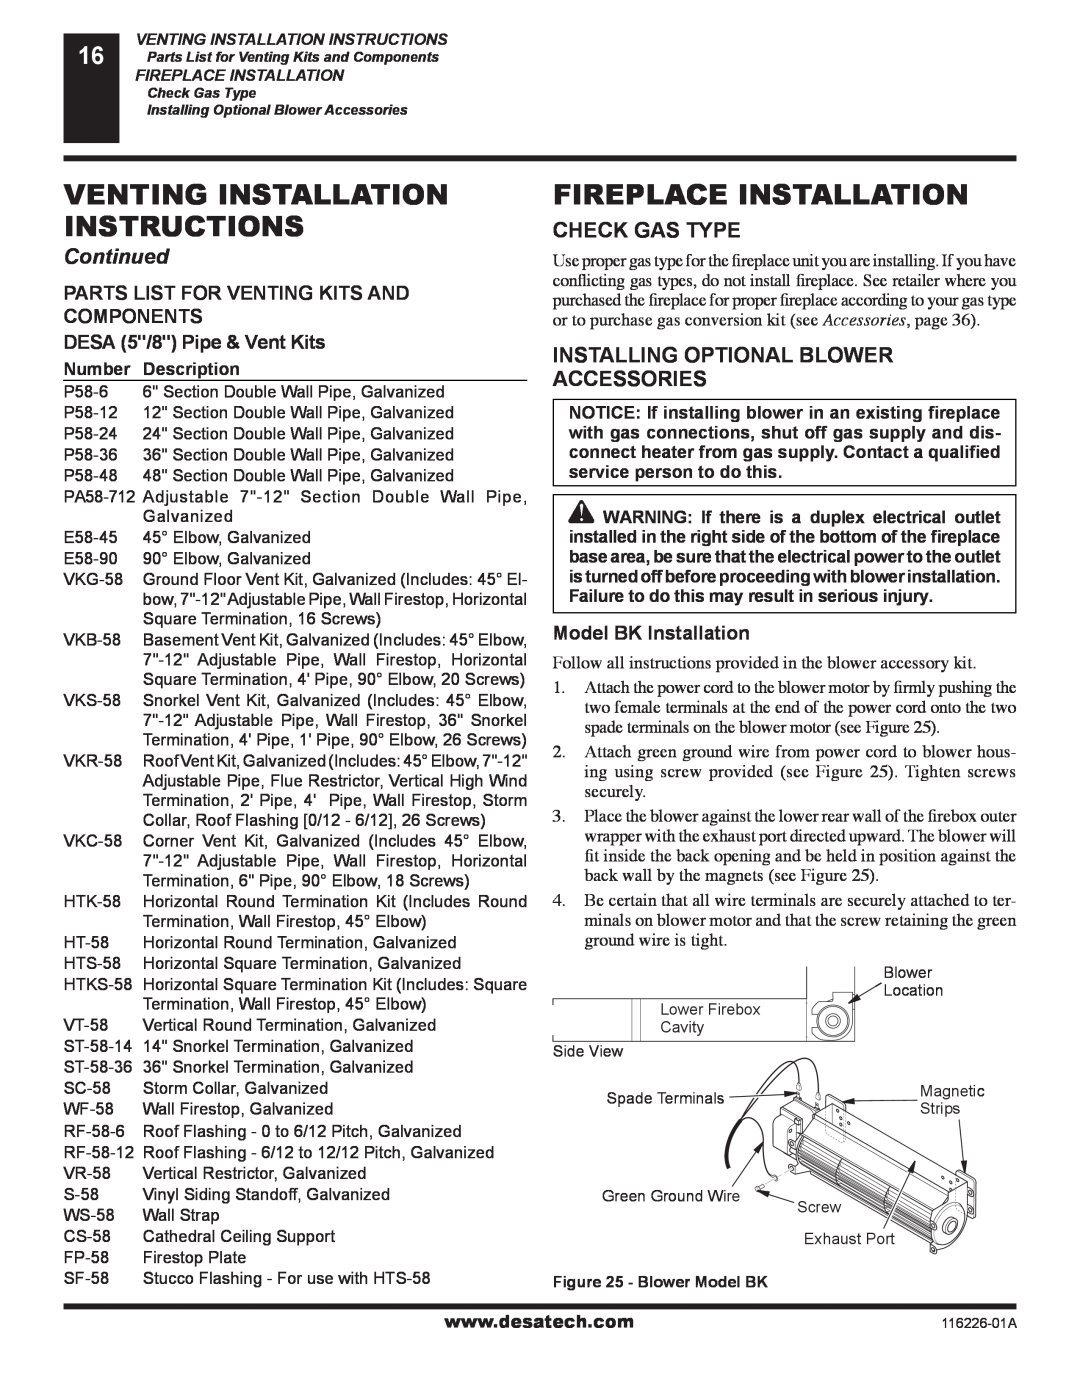 Desa (V)KC36N Venting Installation, Instructions, Fireplace Installation, Check Gas Type, Parts List For Venting Kits And 